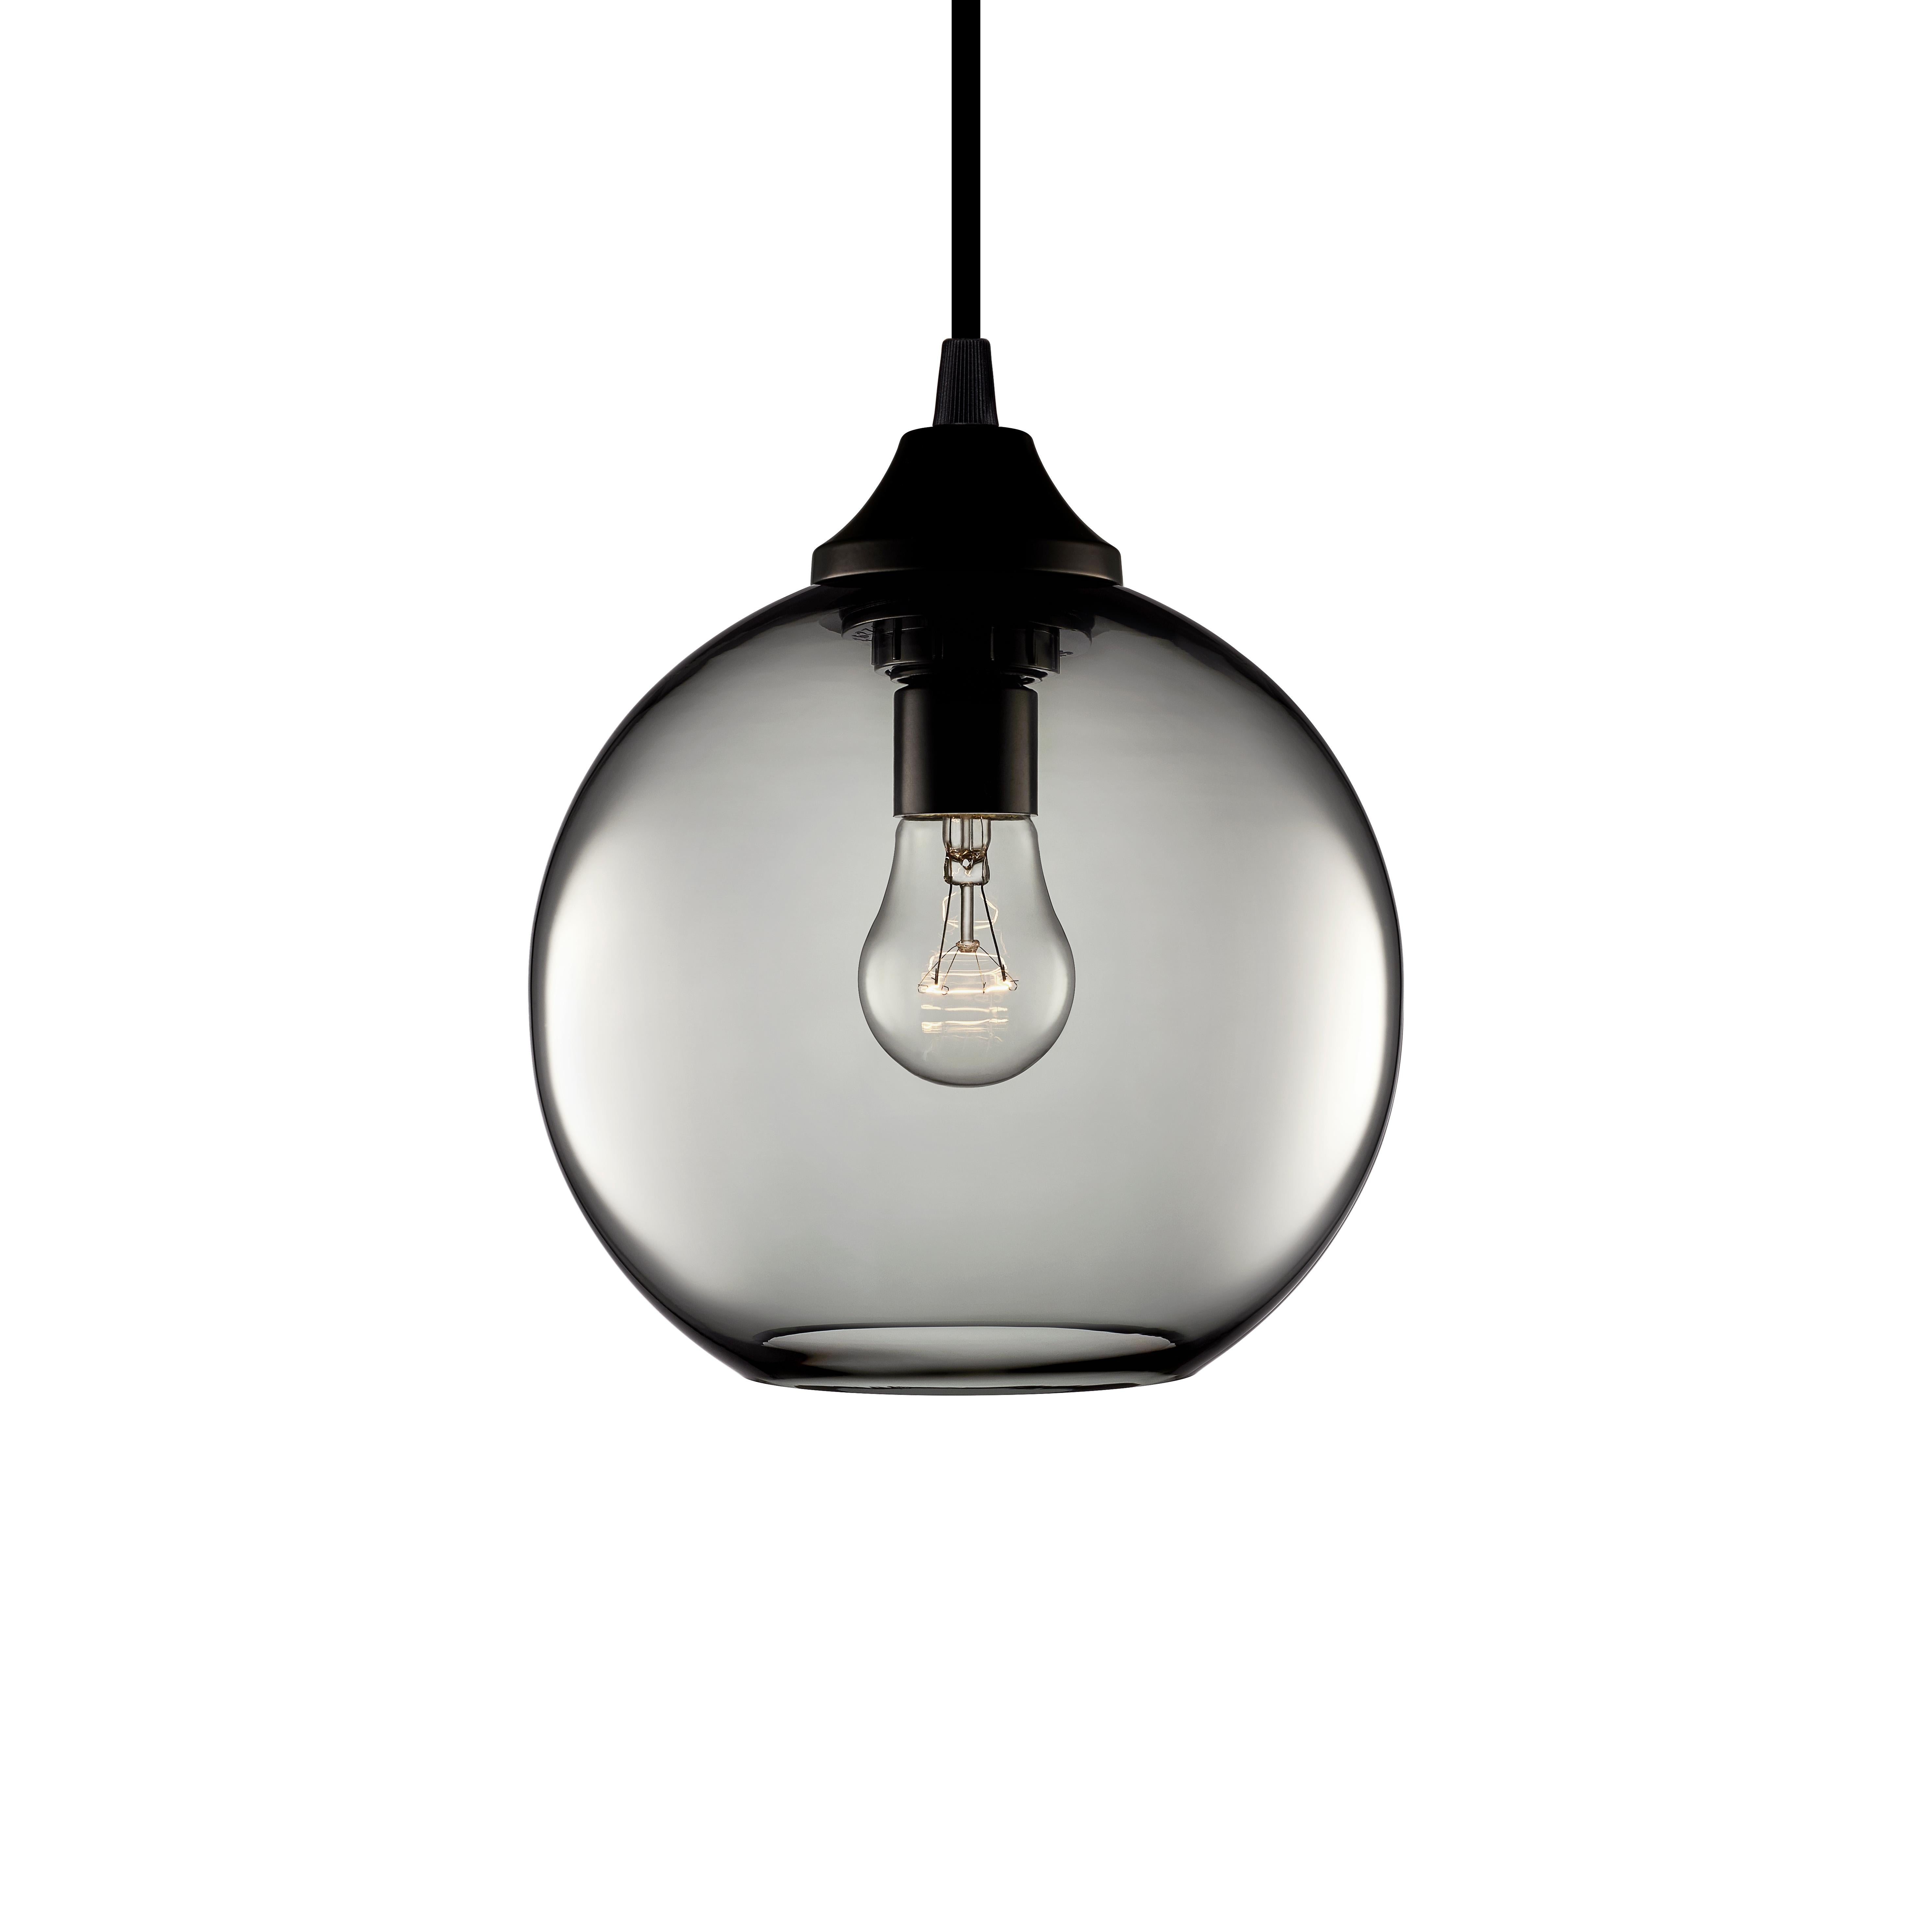 Solitaire Petite Gray Handblown Modern Glass Pendant Light, Made in the USA